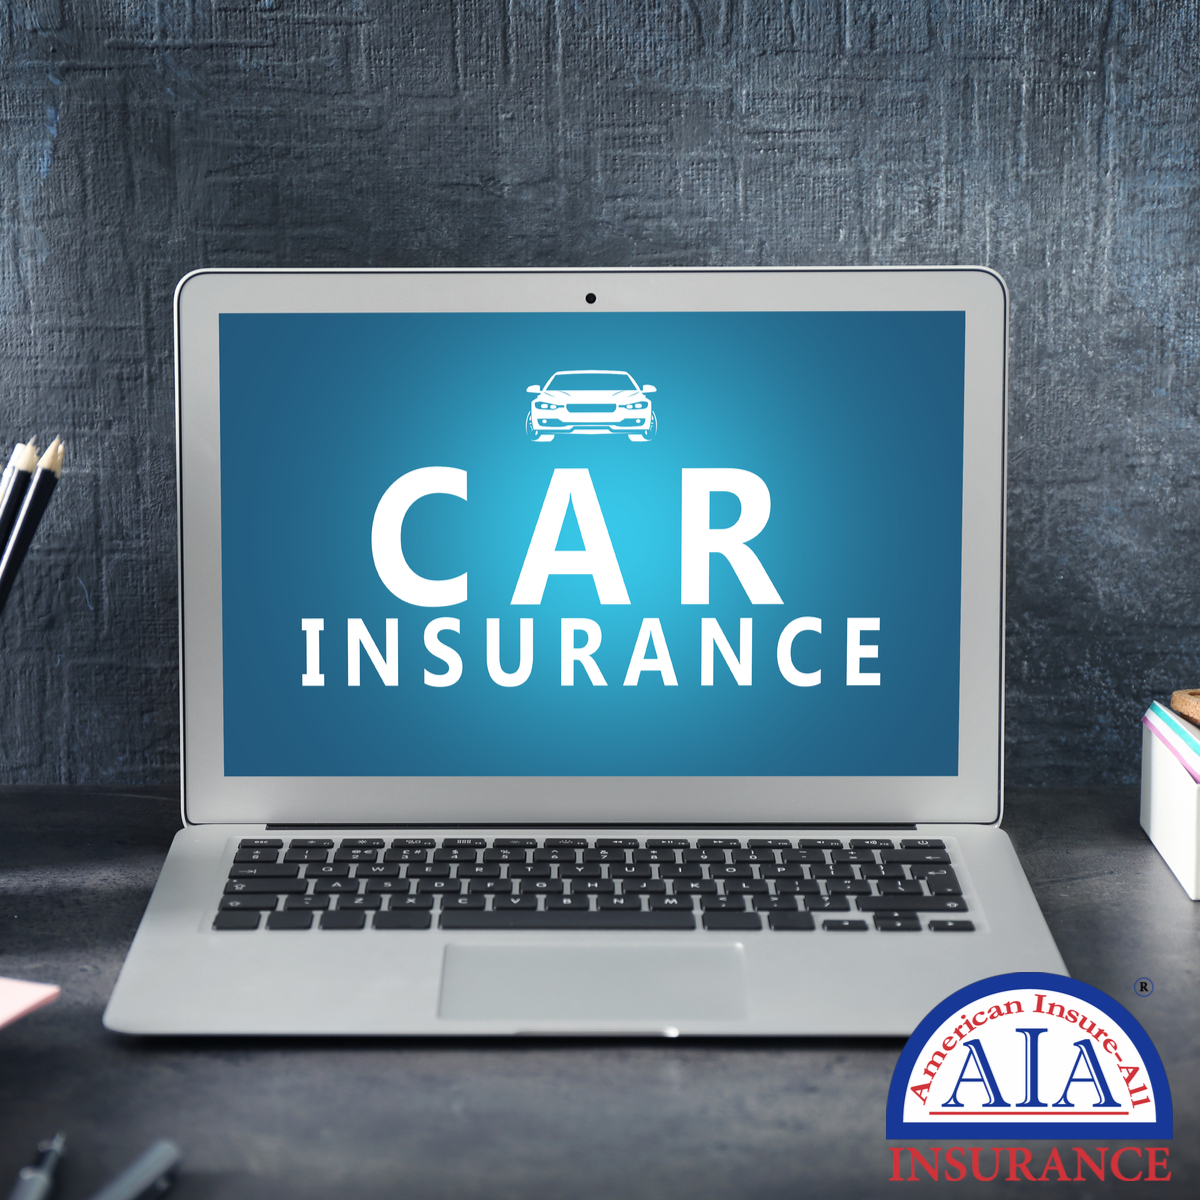 American Insure-All® for Affordable Auto Insurance Company in Snohomish County